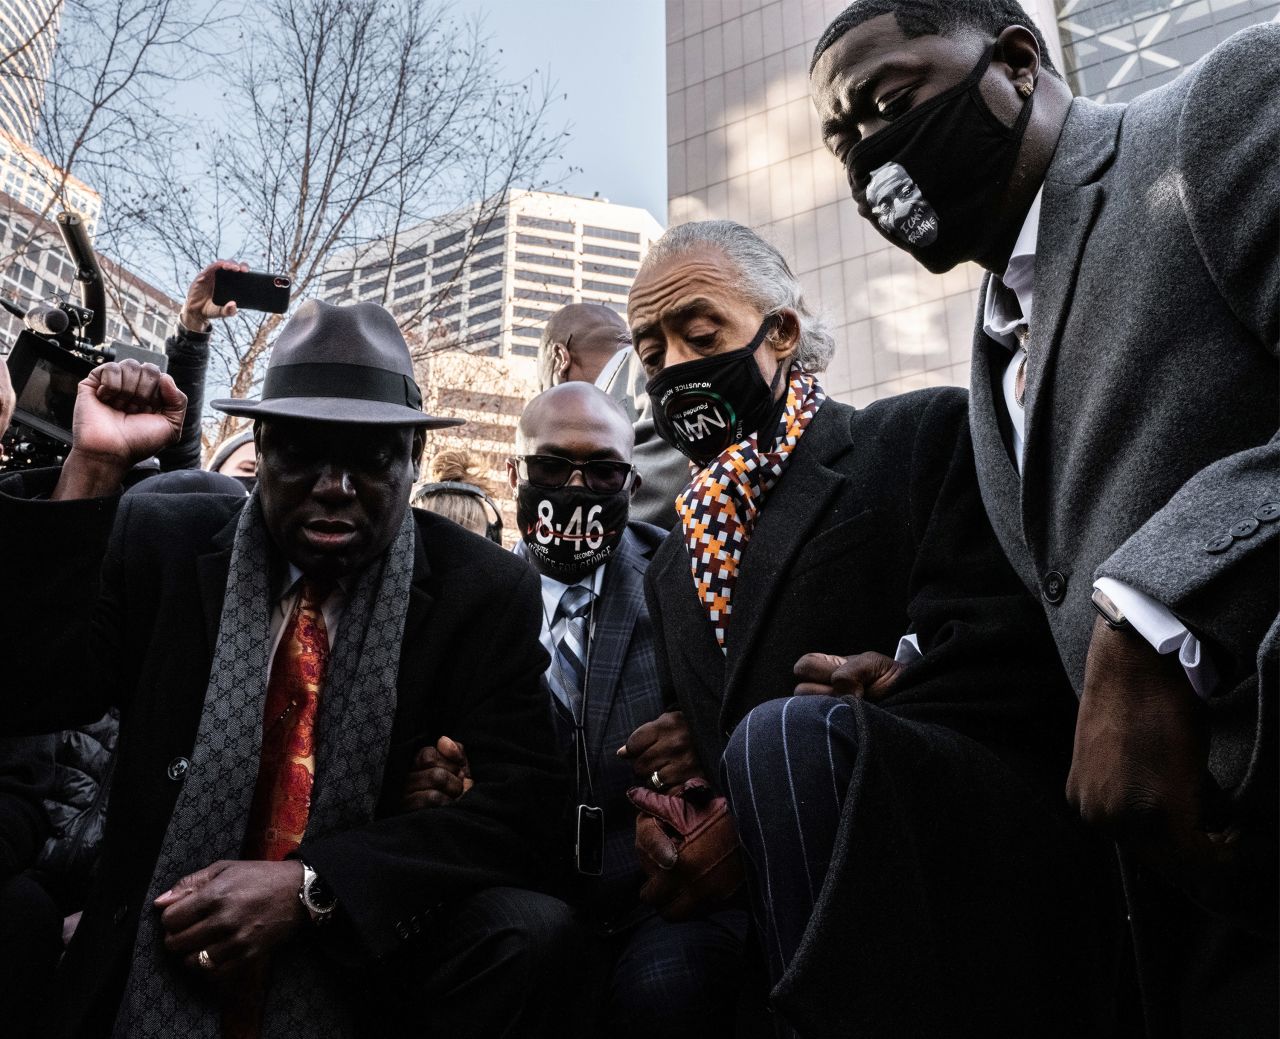 Attorney Ben Crump raises a fist as he takes a knee in Minneapolis with George Floyd's brother Philonise, the Rev. Al Sharpton and Floyd's nephew Brandon Williams on Monday, March 29. <a href="https://www.cnn.com/2021/03/29/us/derek-chauvin-george-floyd-trial-start/index.html" target="_blank">The trial of former police officer Derek Chauvin</a> started on Monday, 10 months after Floyd's death.